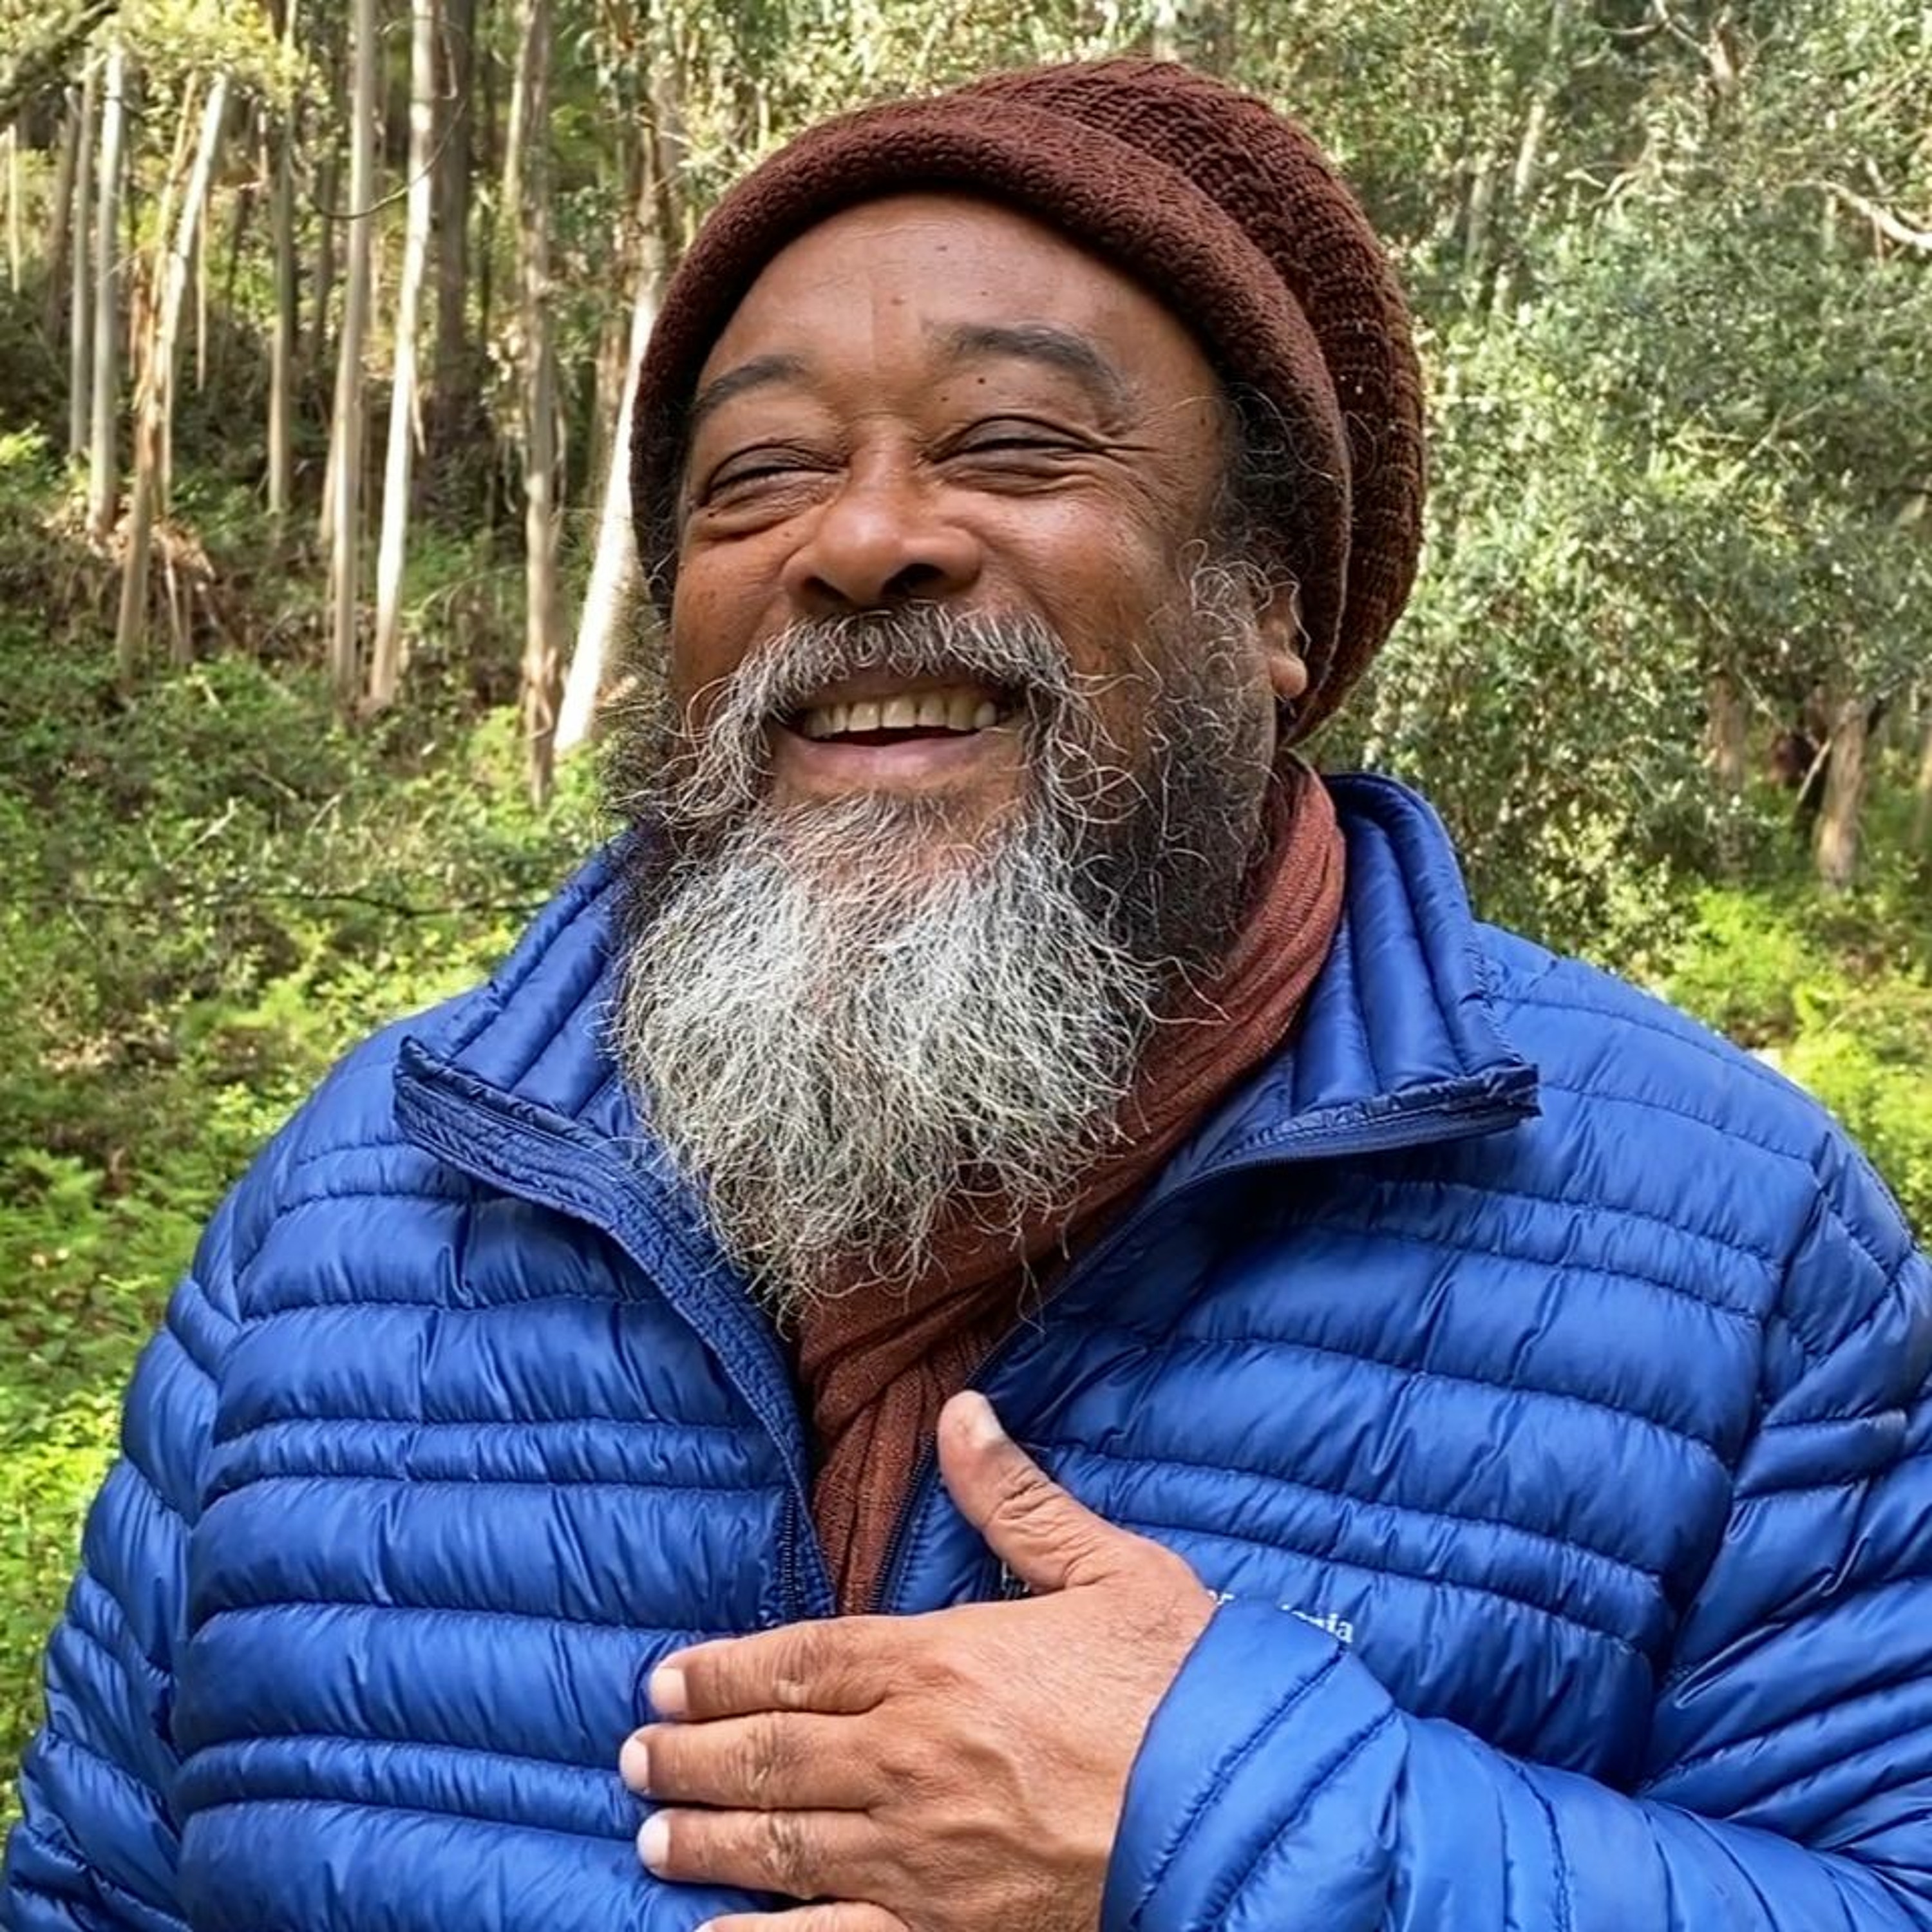 A Morning with Moojibaba in the Forest